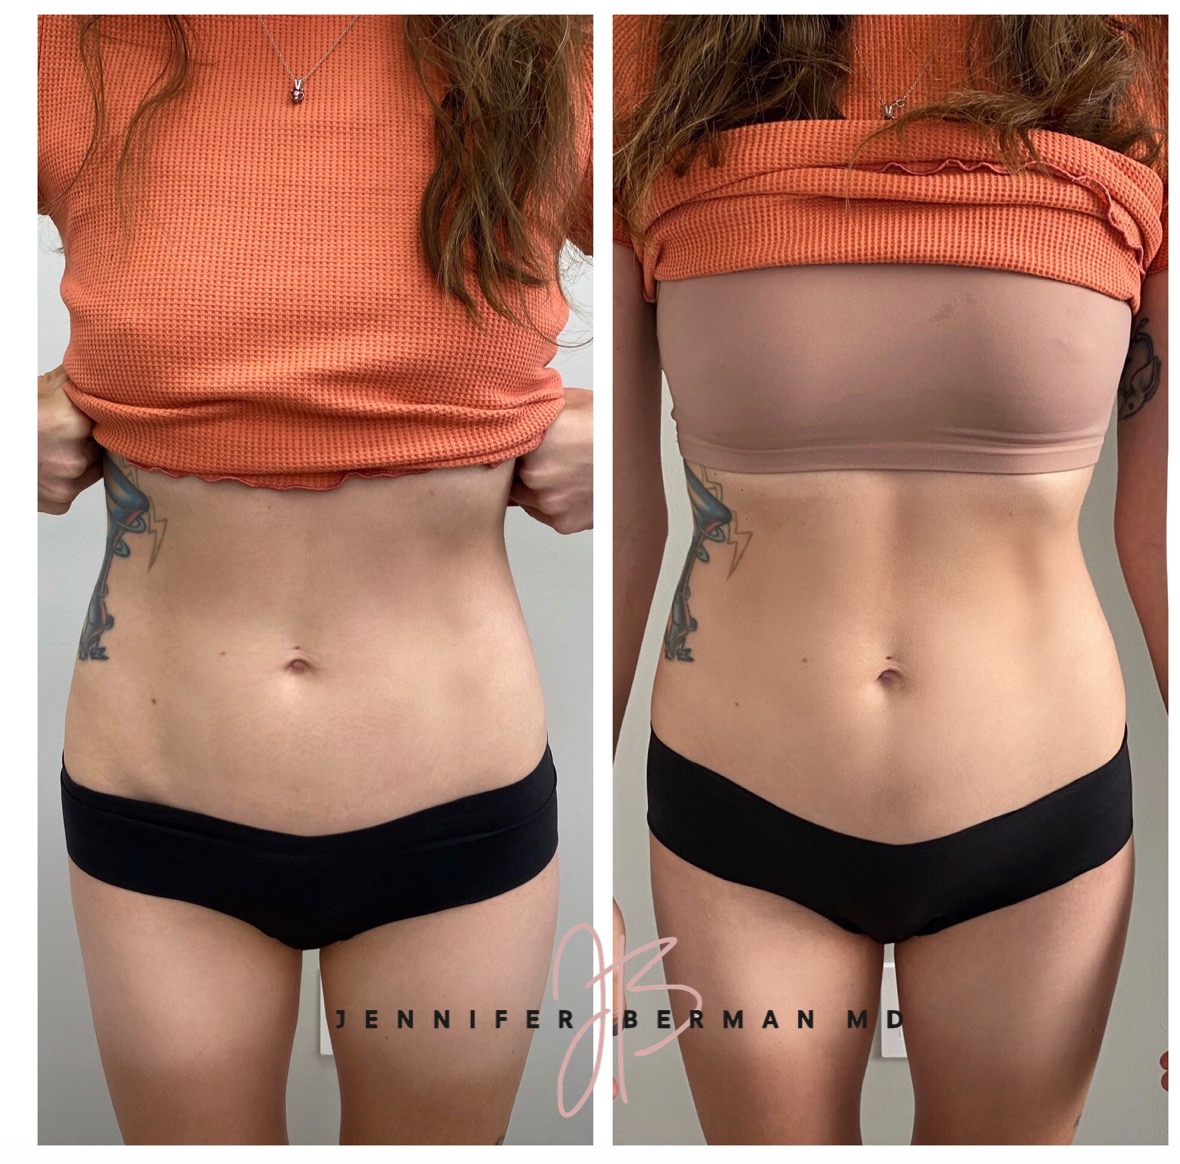 Before and after comparison showing abdominal toning results, highlighting changes during menopause.